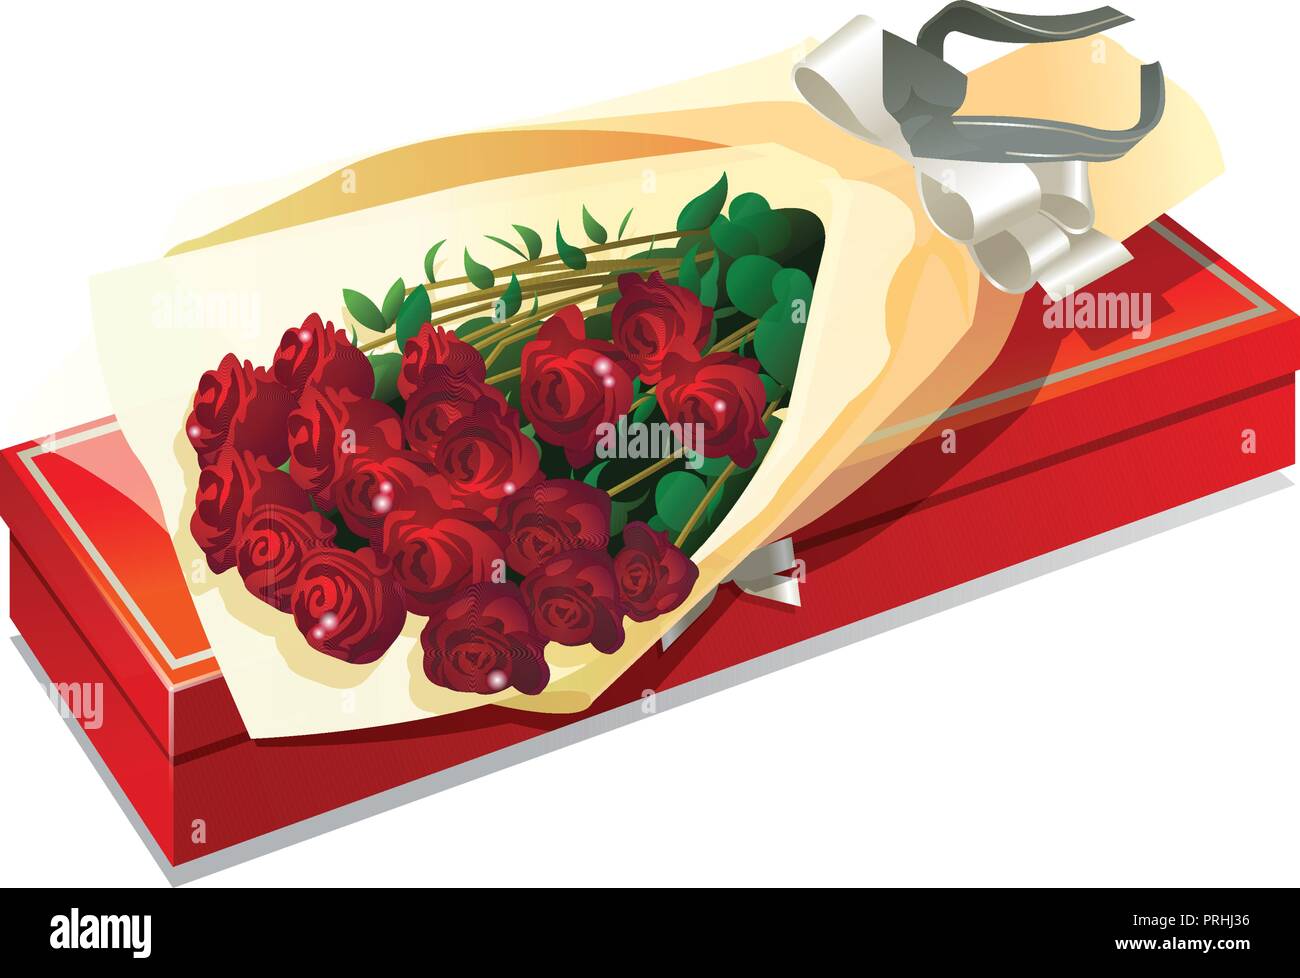 flowers and box illustrations. realistic vector Illustration Stock Vector